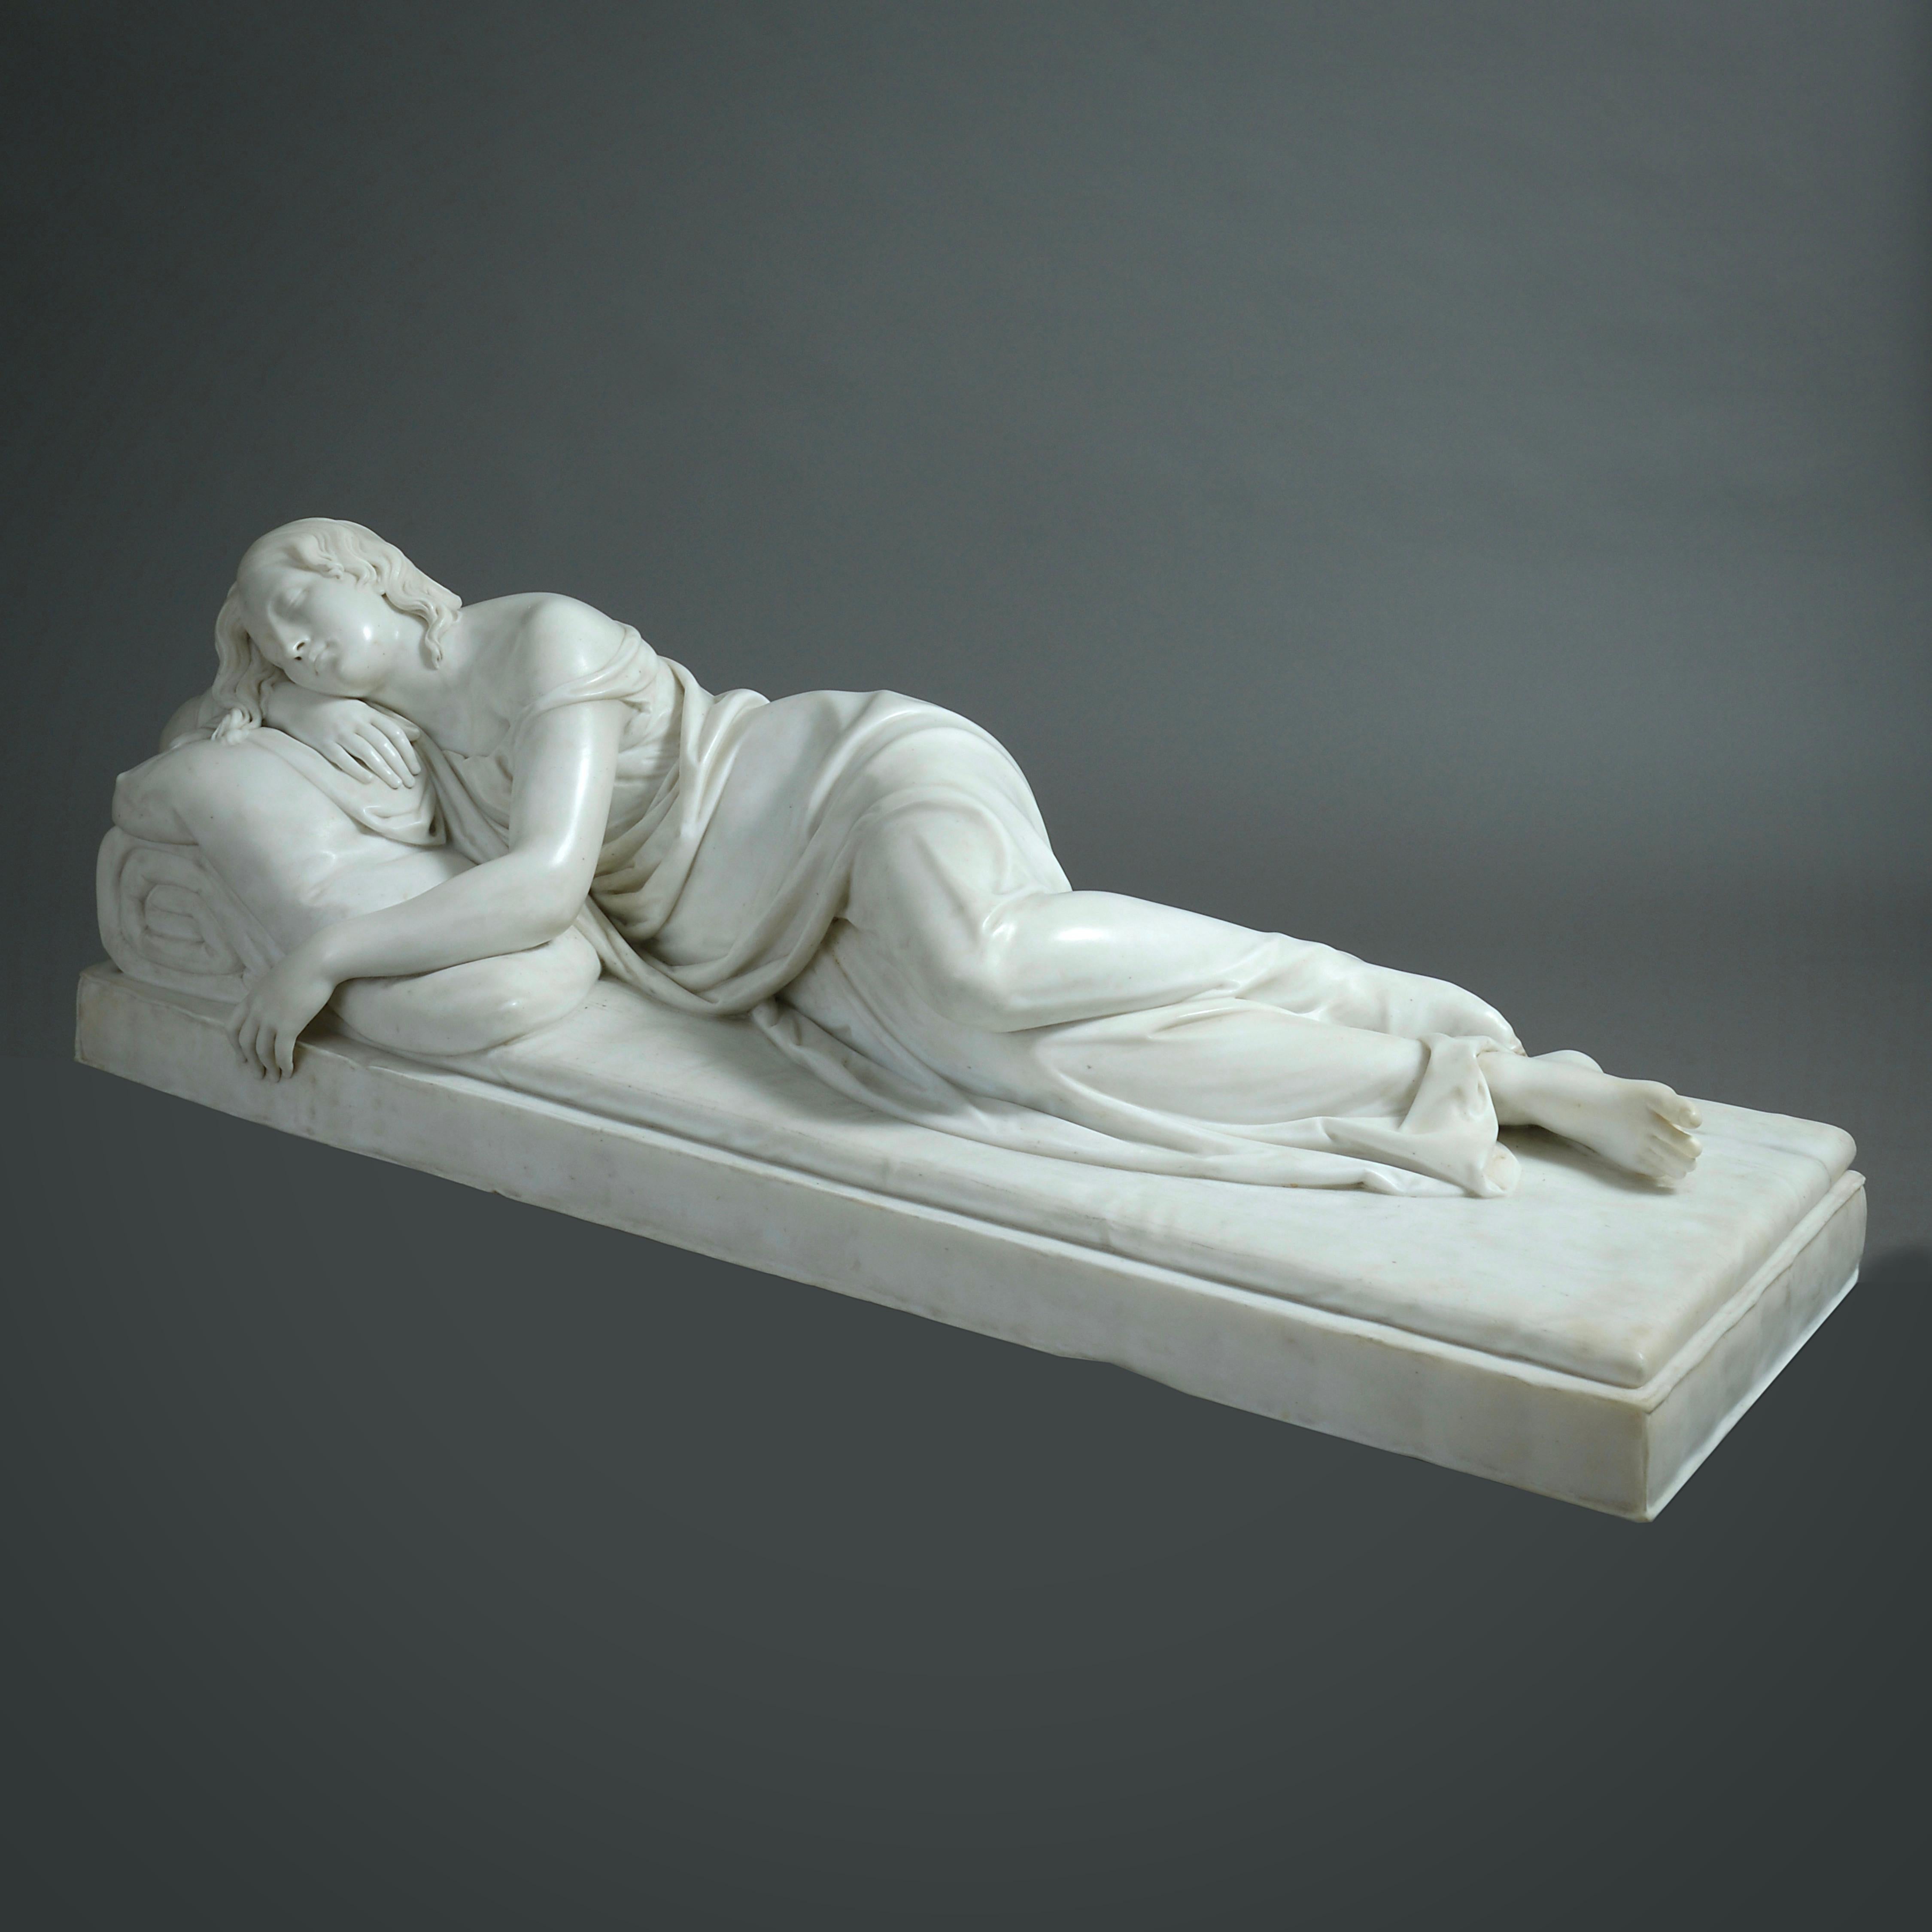 EDWARD HODGES BAILY (1788-1867)

SLEEPING NYMPH

incised signature and date E H Baily, R.A. / Sculp. London / 1840

Statuary marble.
